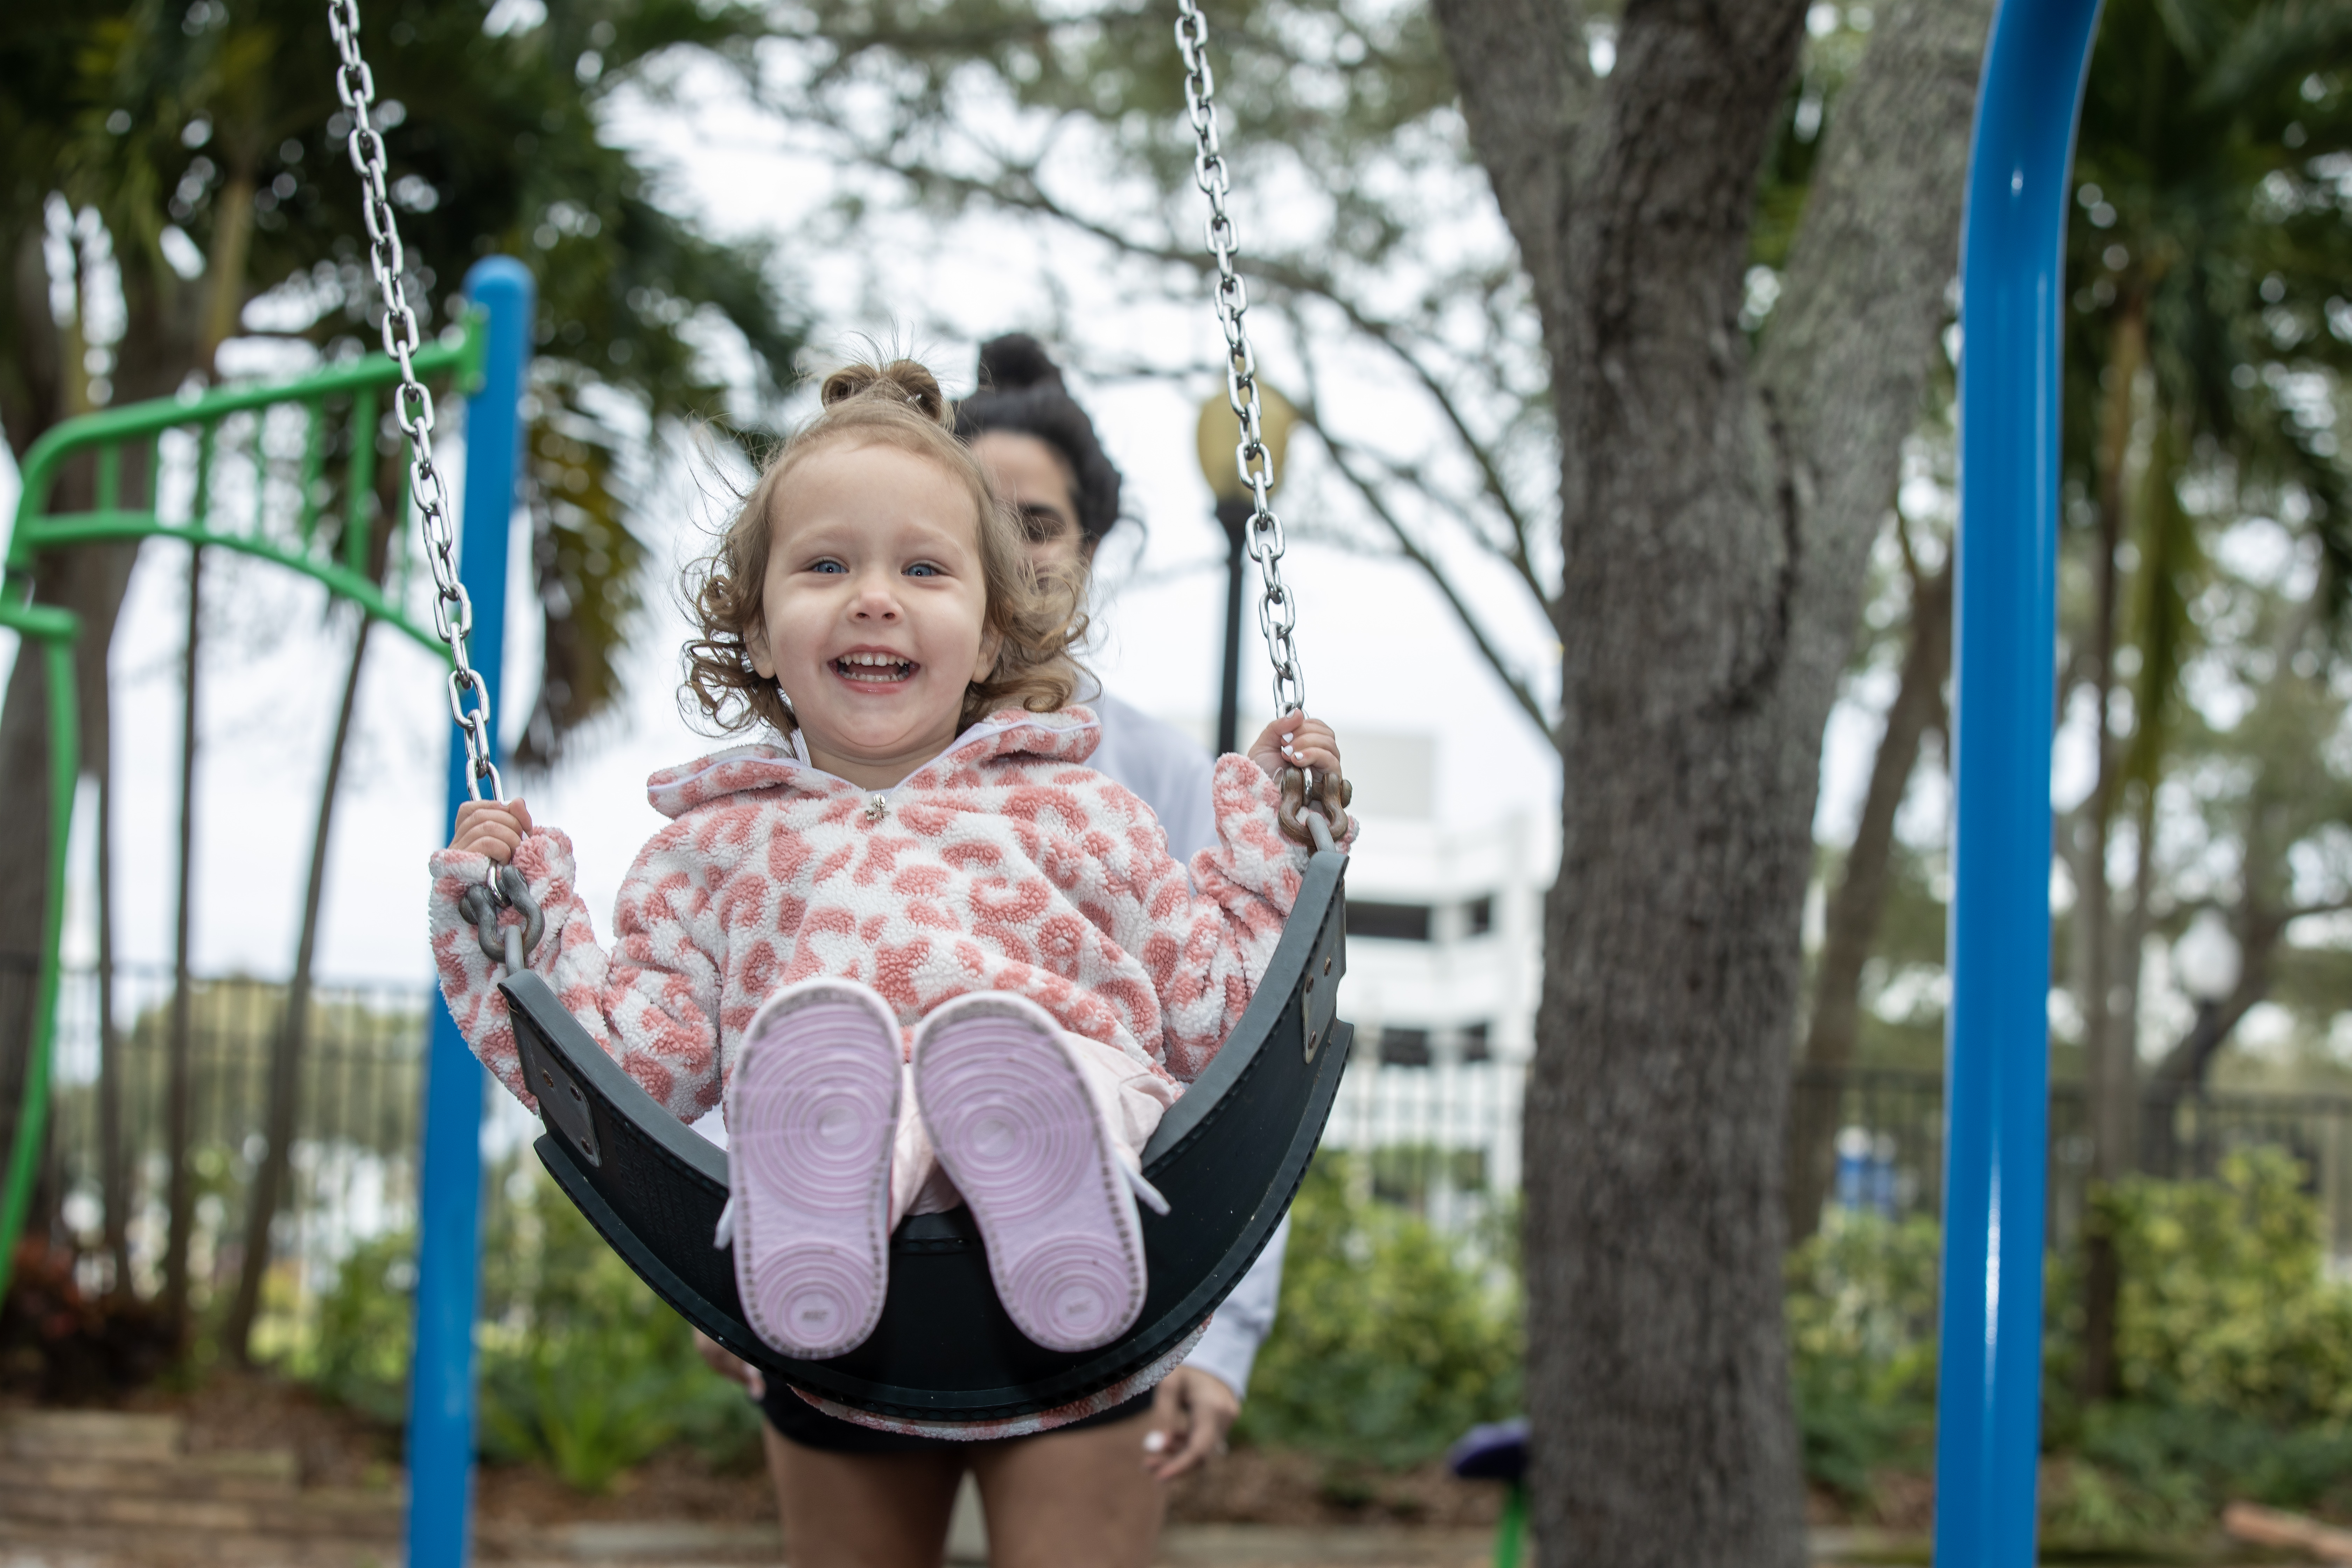 Heart patient Millie playing at a park outside on a swing.